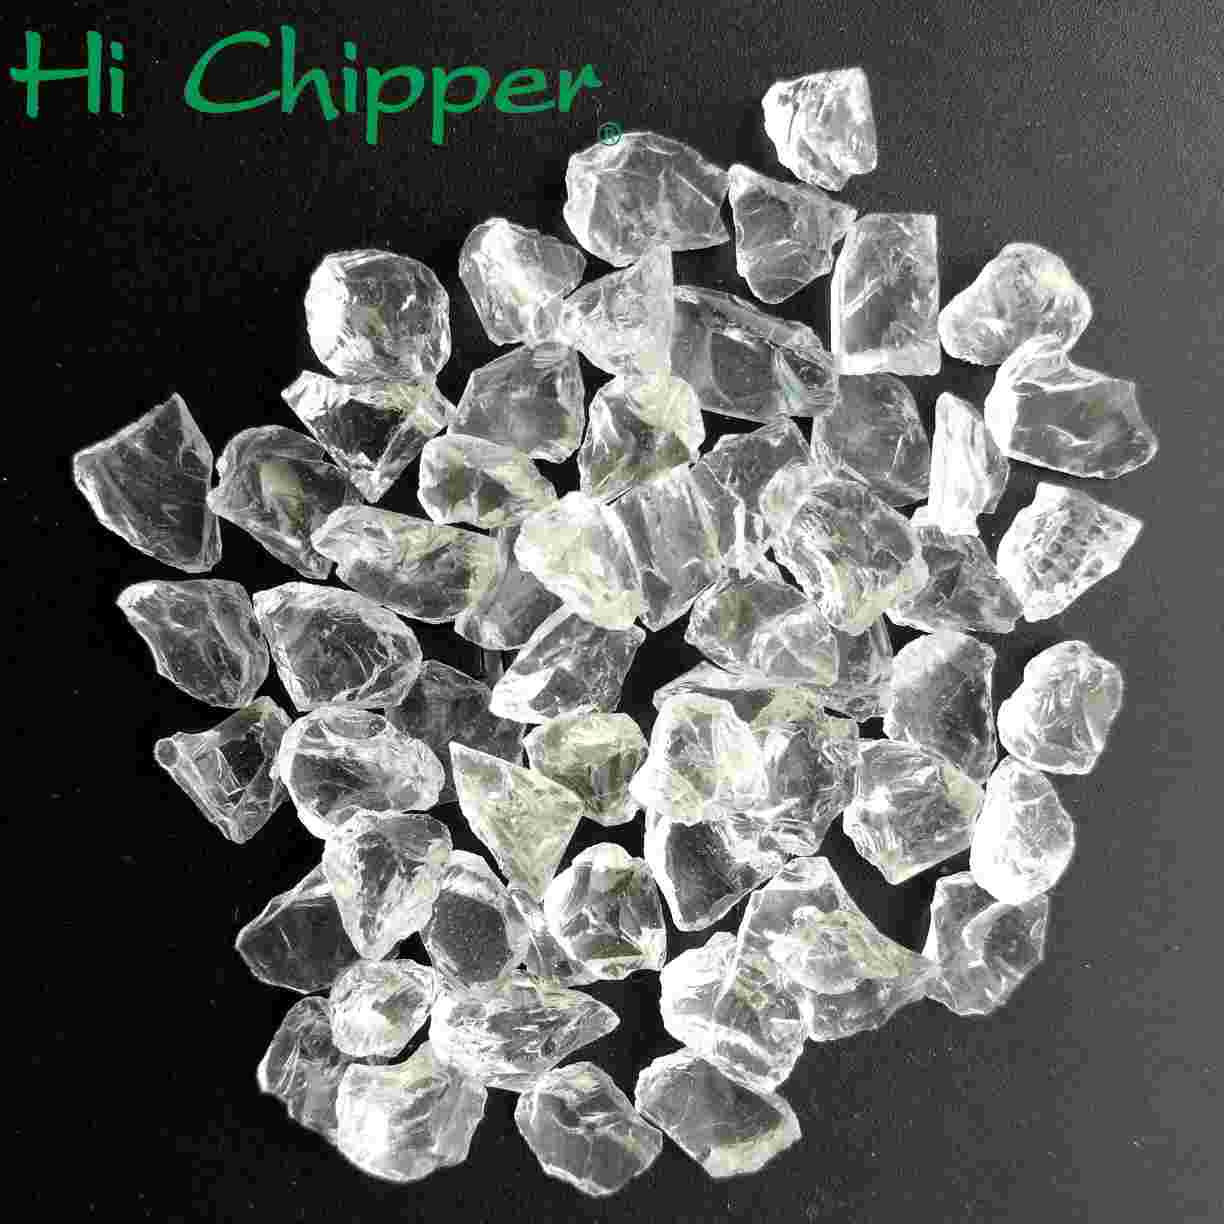 Recycled Broken Colored Glass Terrazzo Green Glass Chips